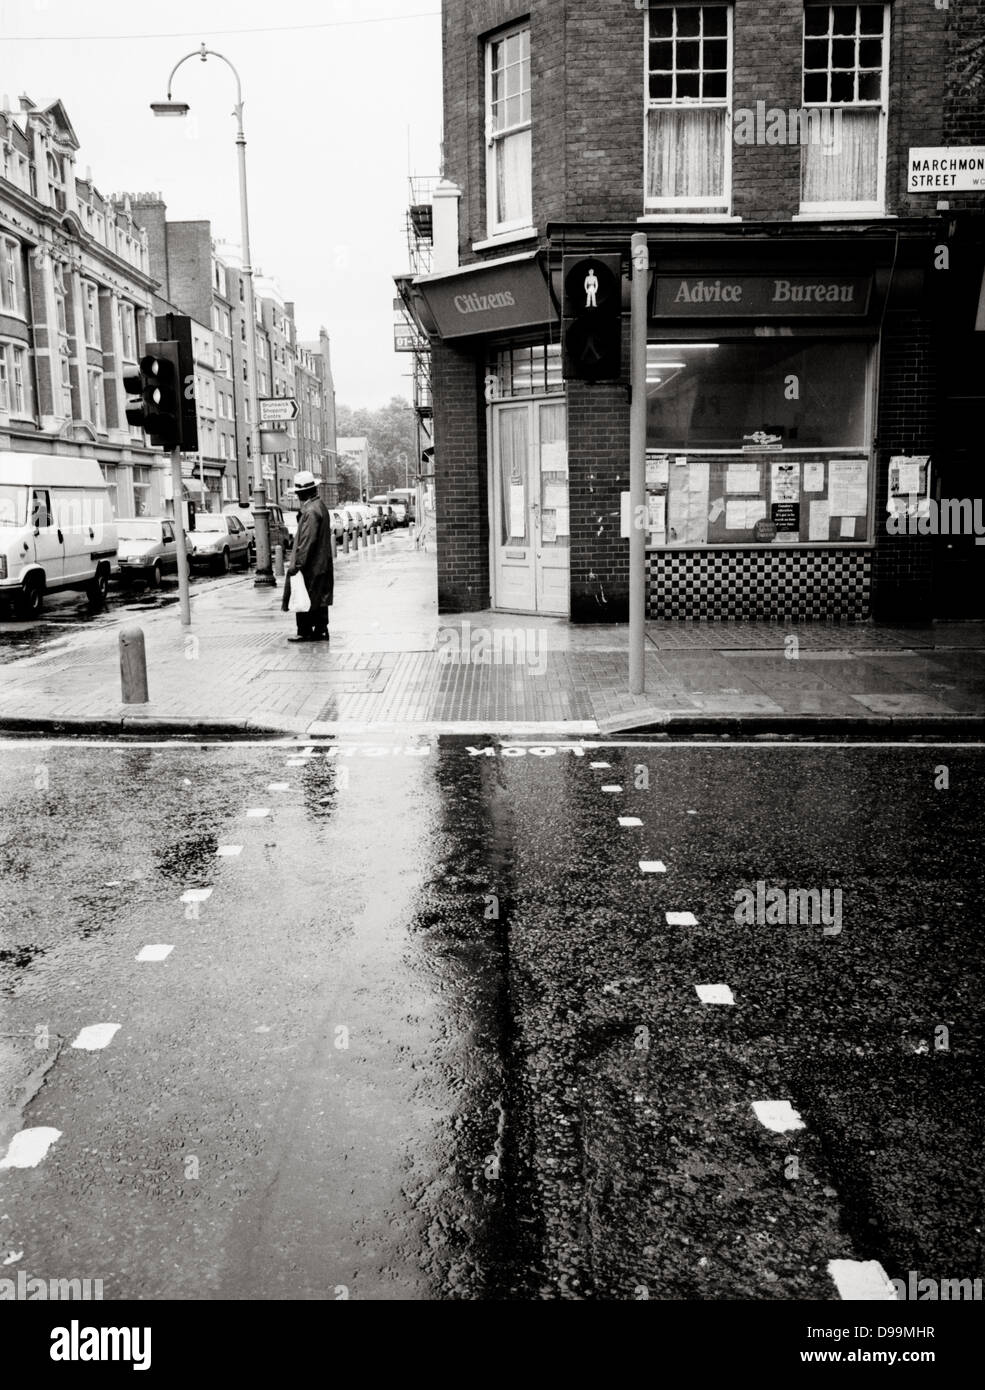 Wet street scene in Marchmont Street, near the Brunswick Centre, Russell Square Bloomsbury, London Stock Photo